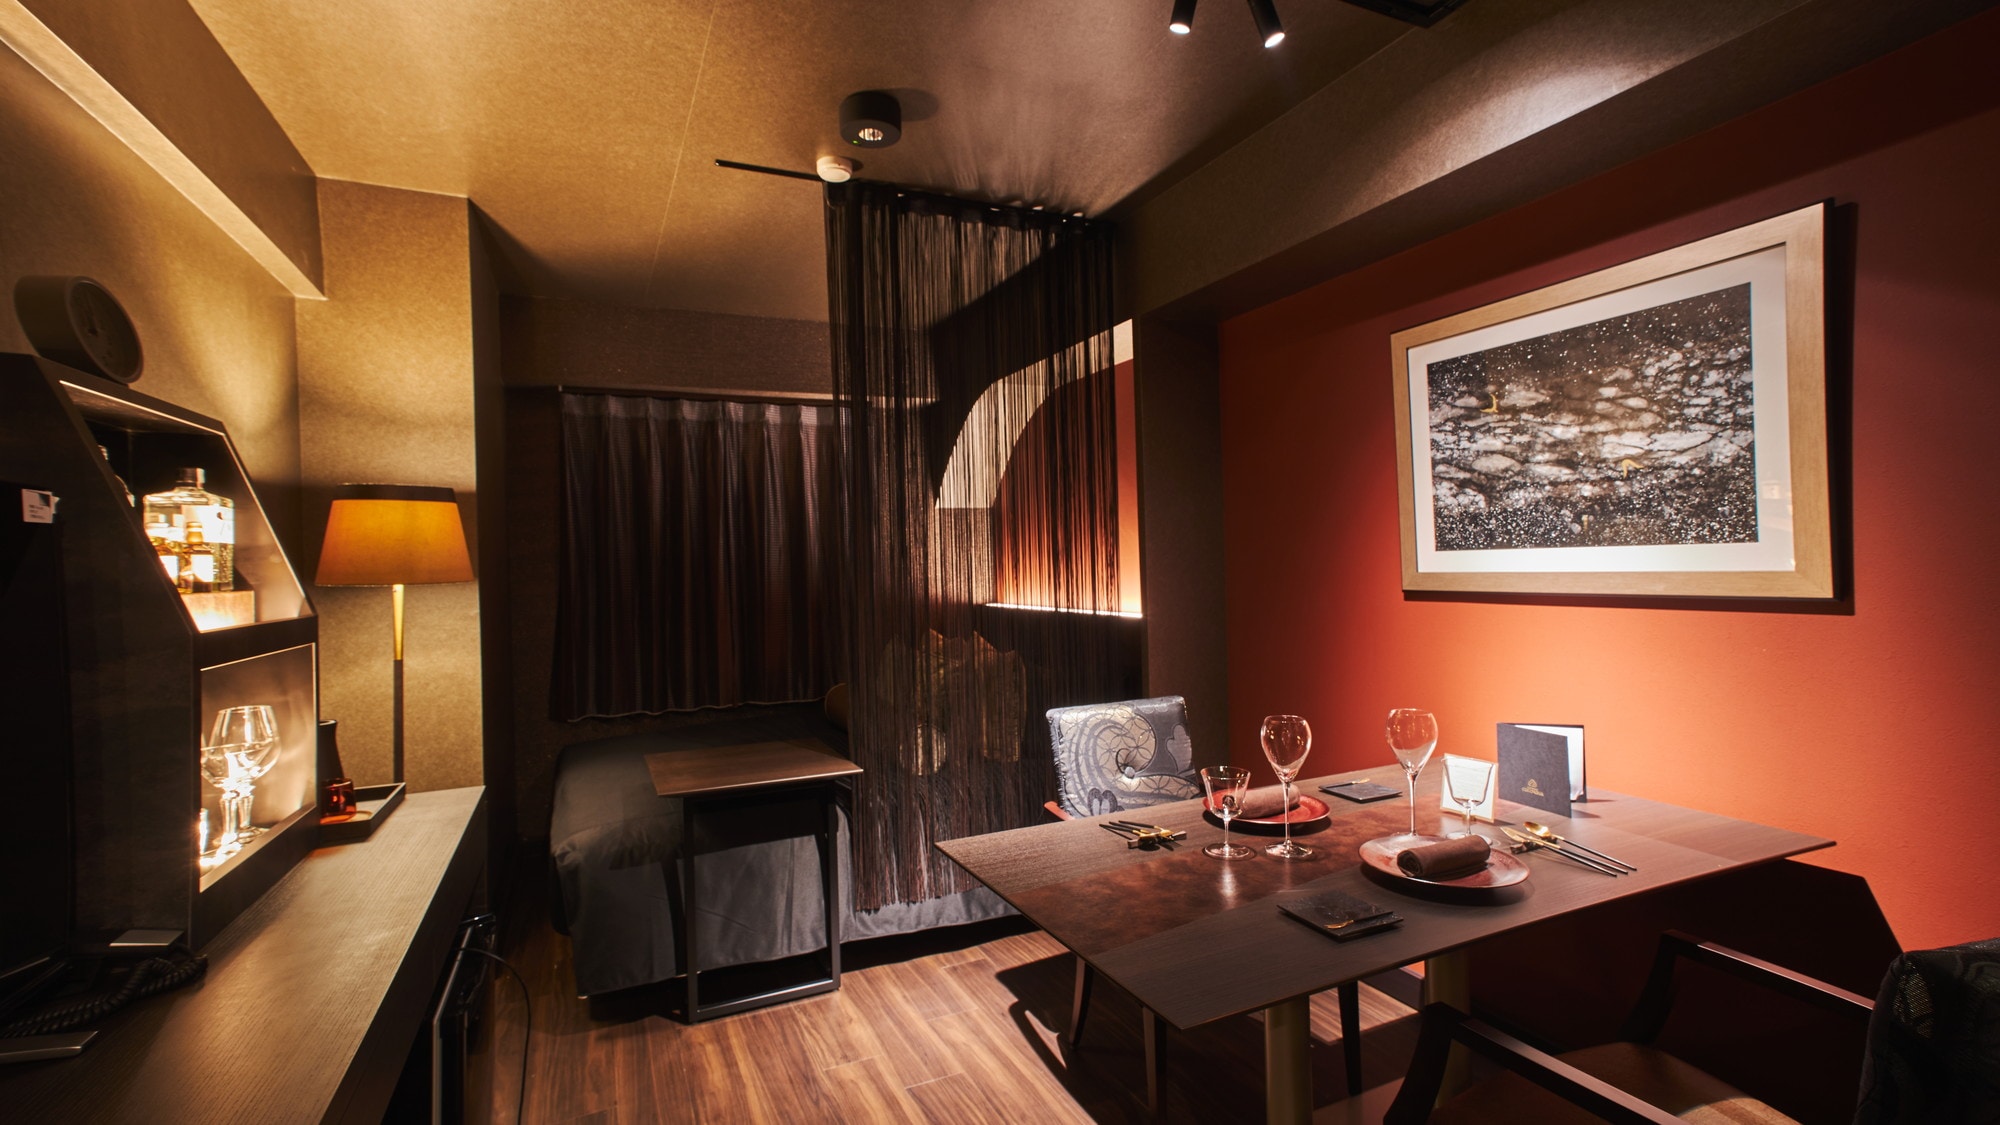 [Special Deluxe Dish] We will welcome you with a setting like a private room in a restaurant.